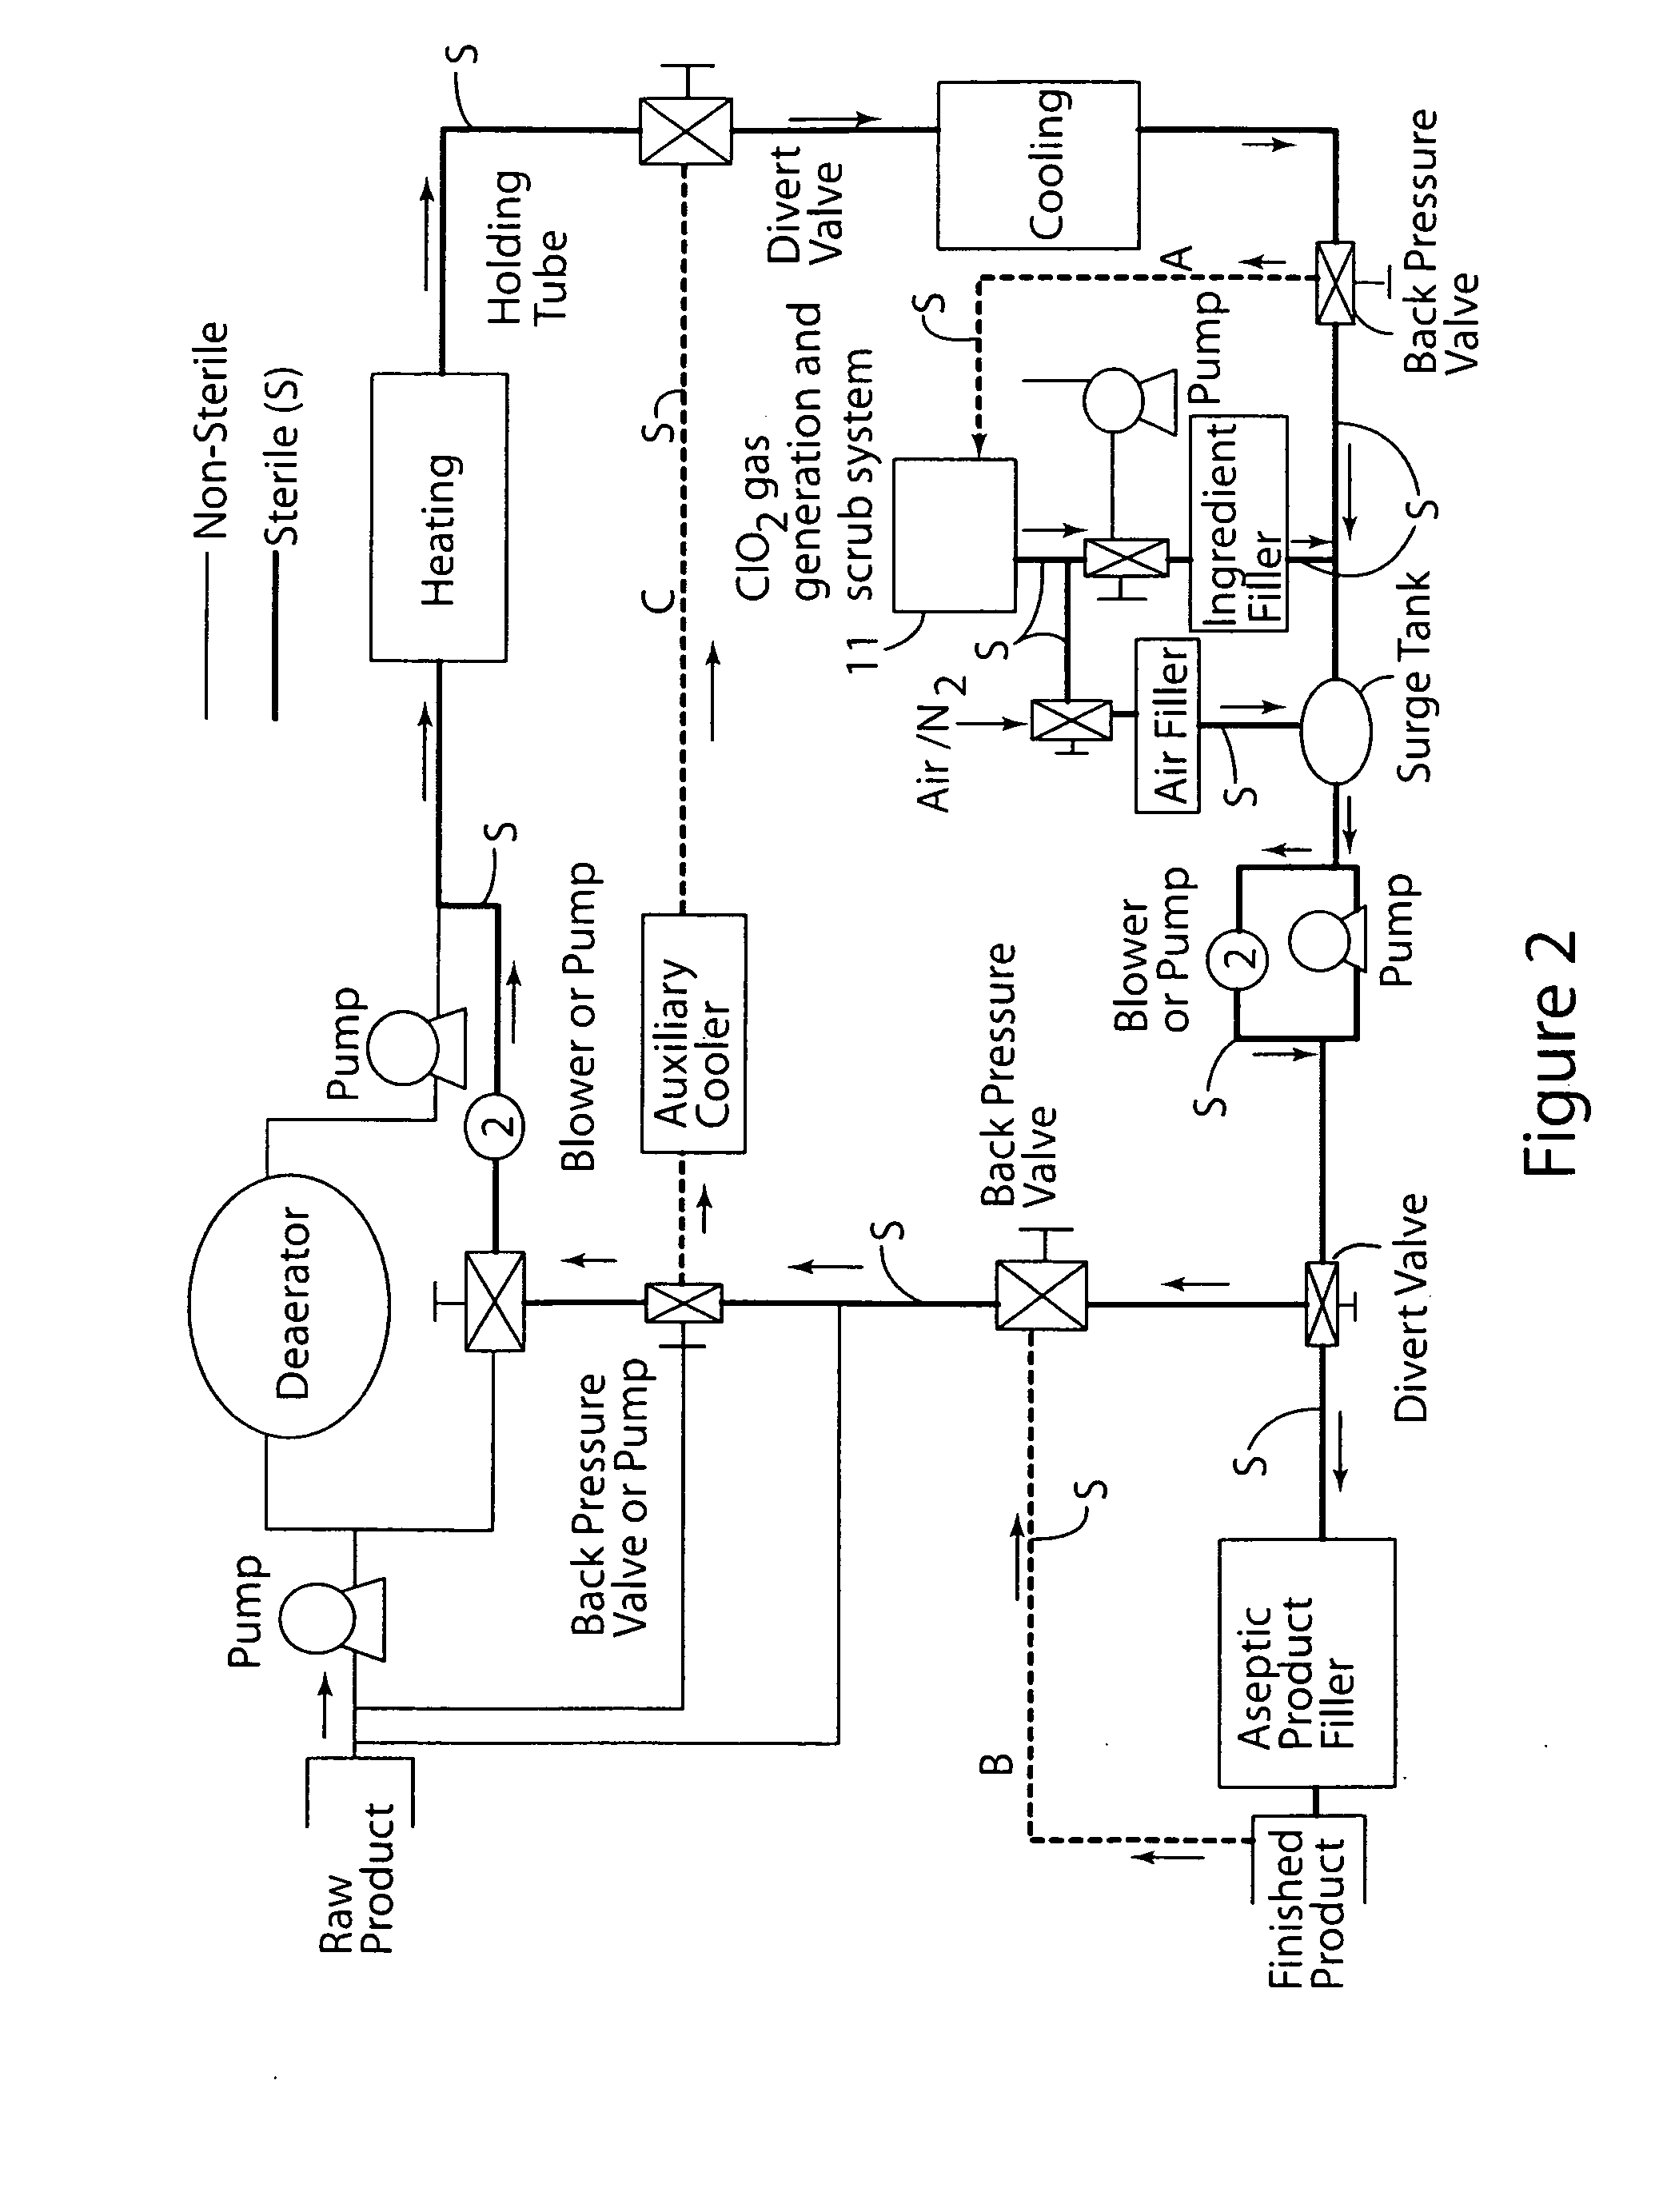 System and method for sterilizing a processing line